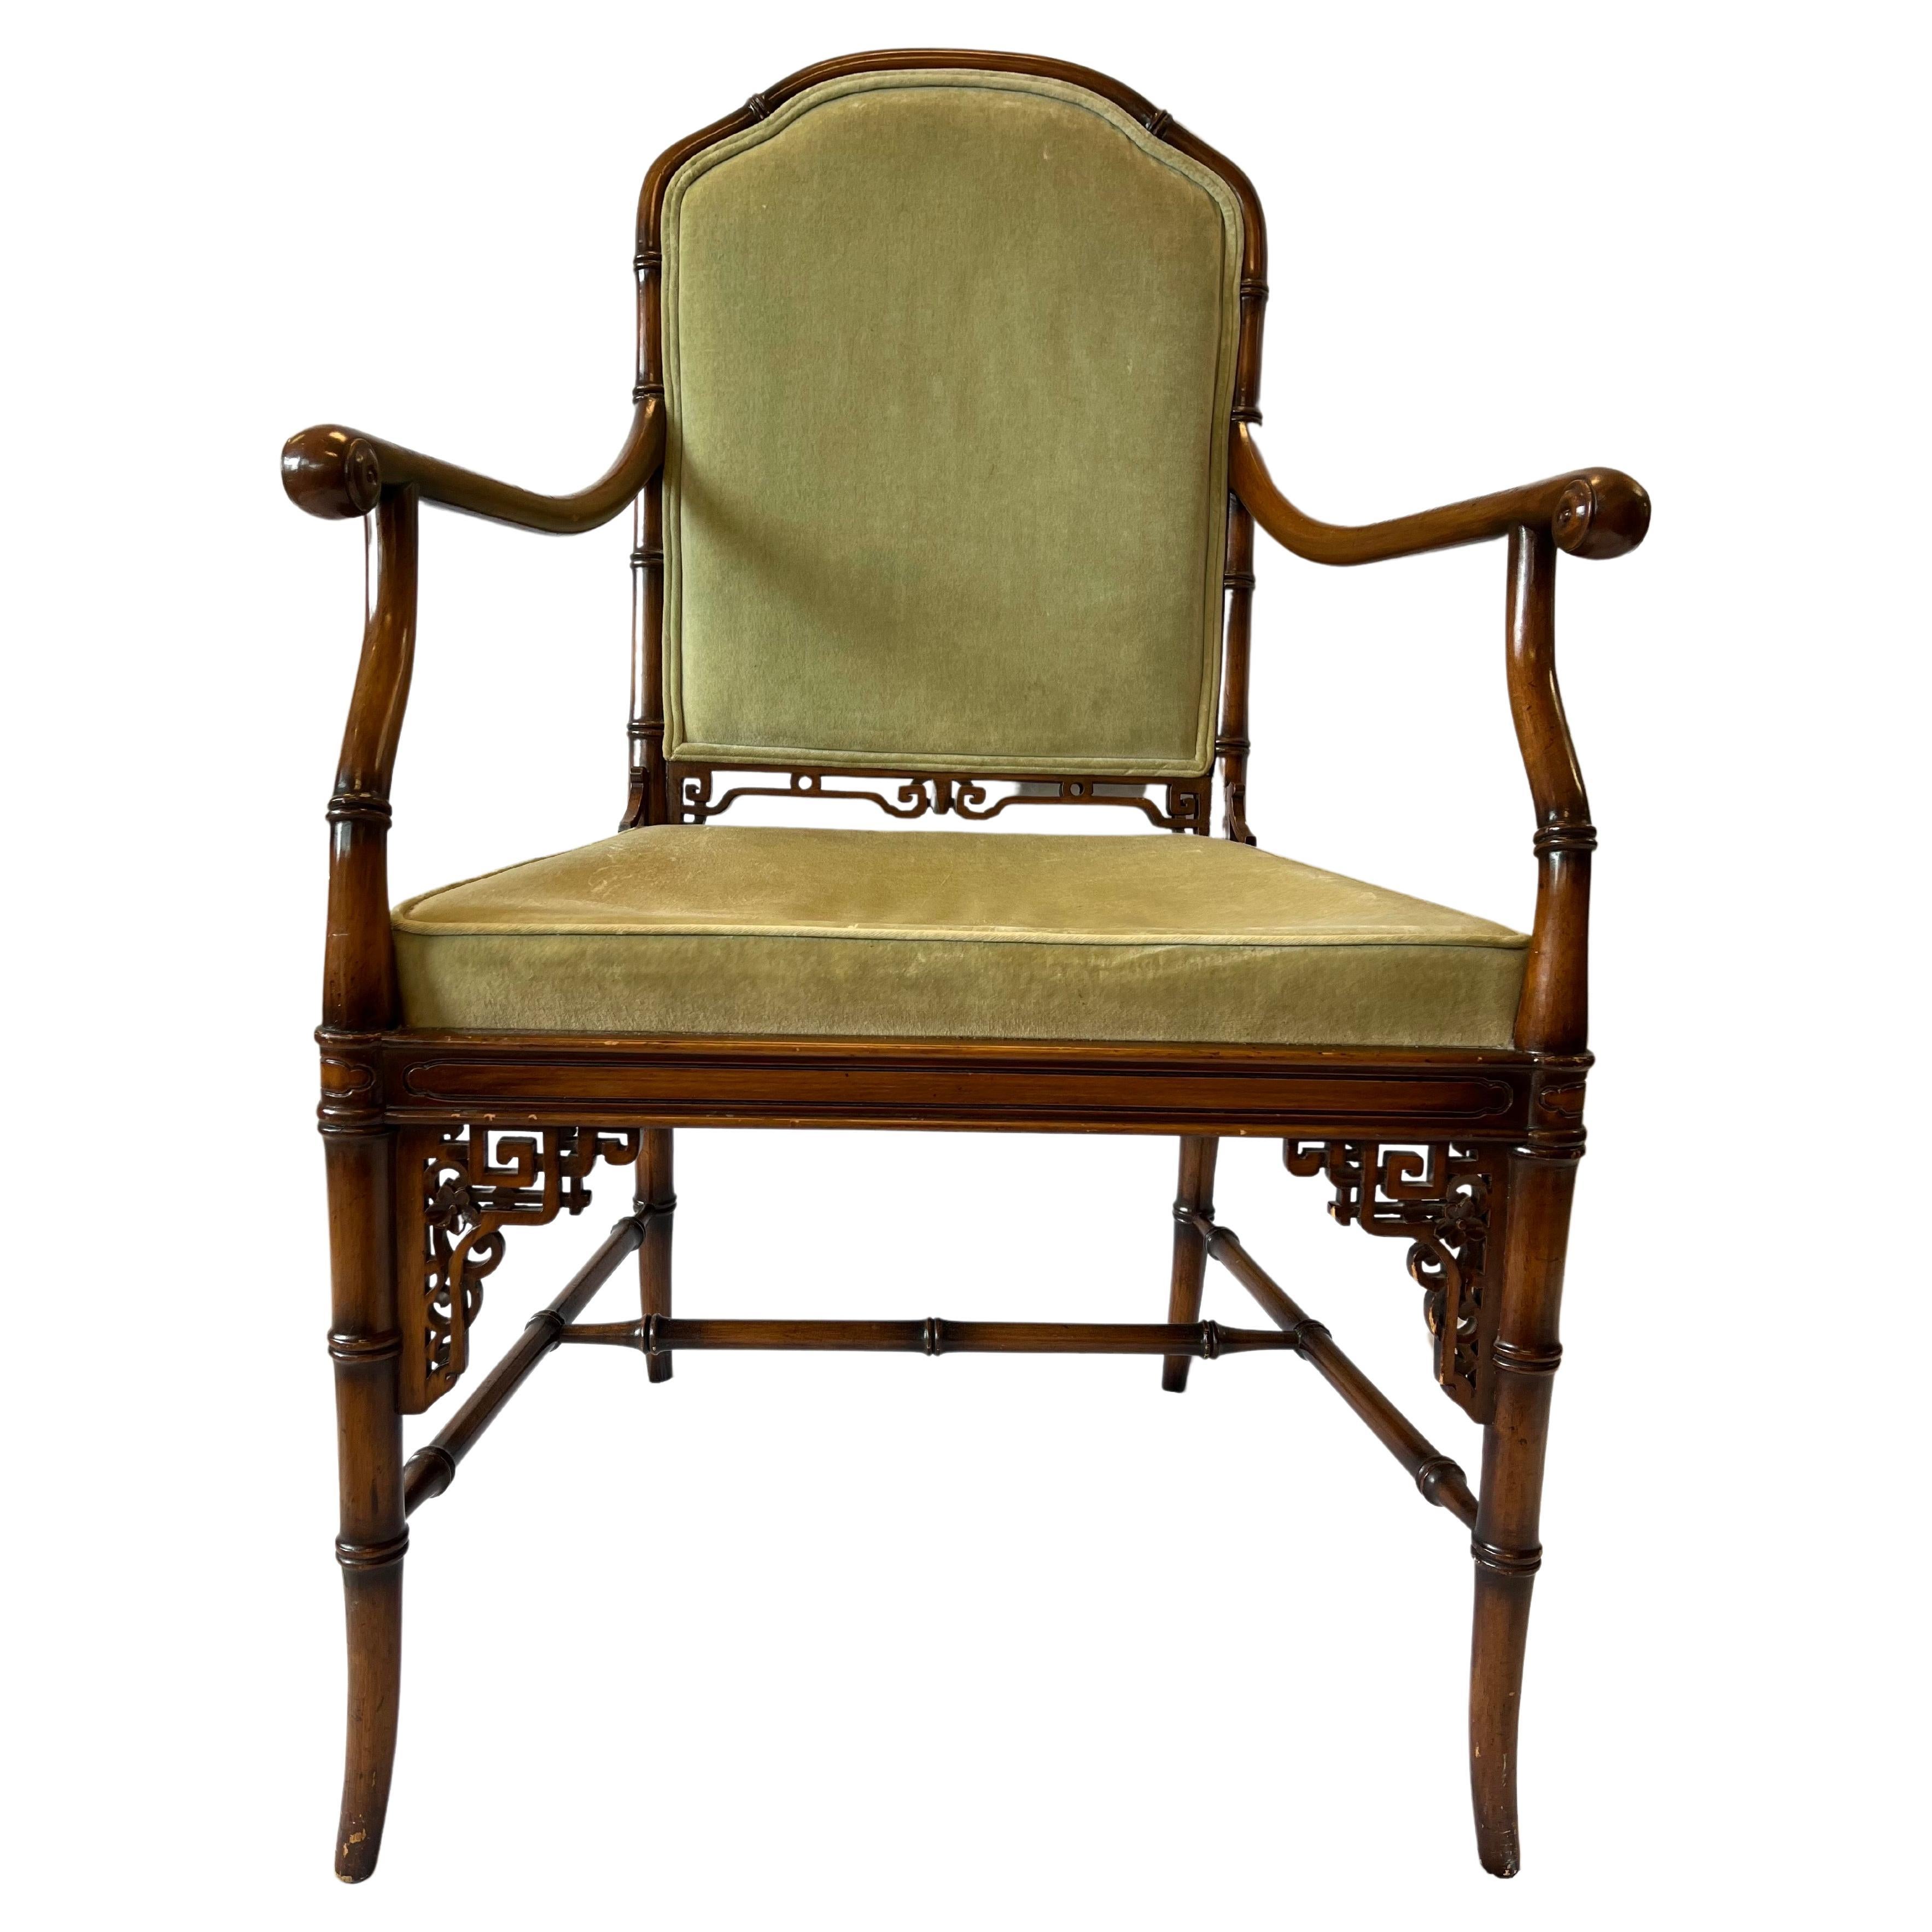 Vintage Faux Bamboo Chinoiserie Style Upholstered Fretwork Armchair Desk Chair